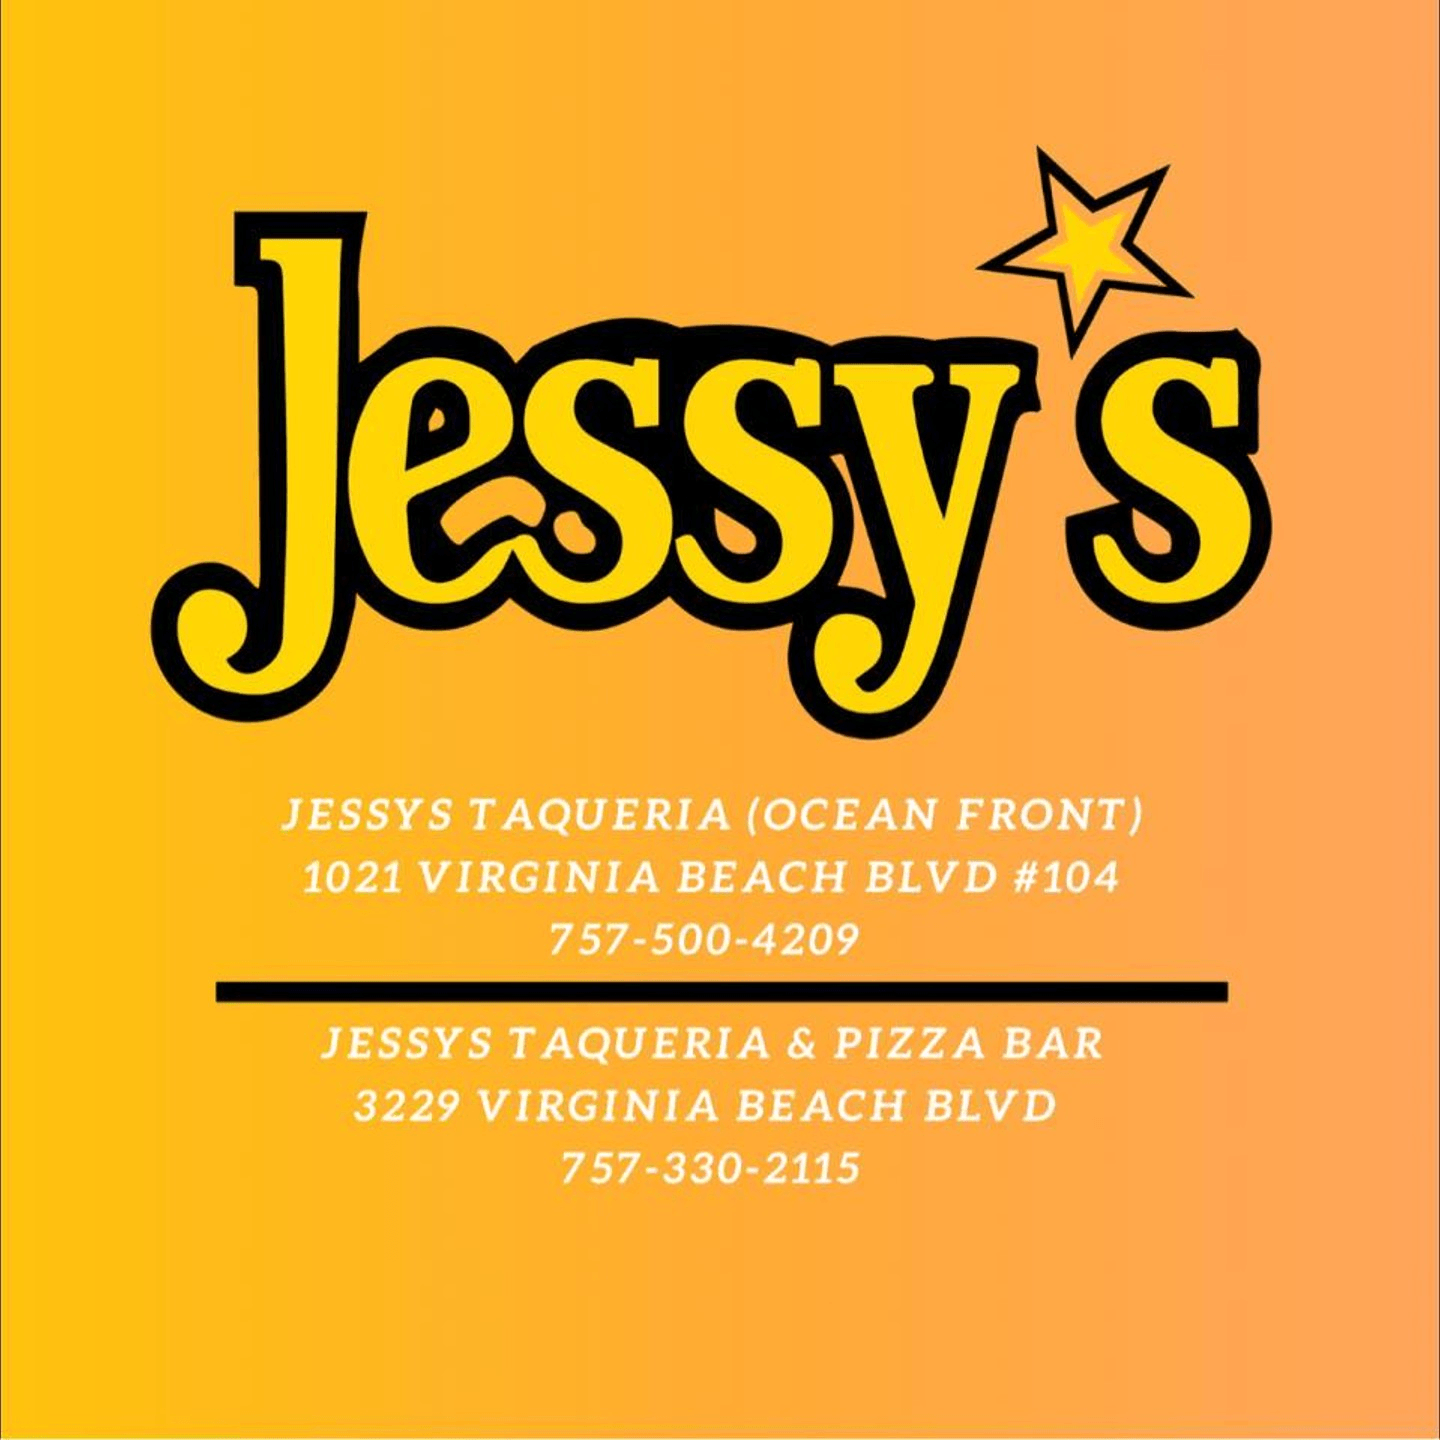 Welcome to Jessys